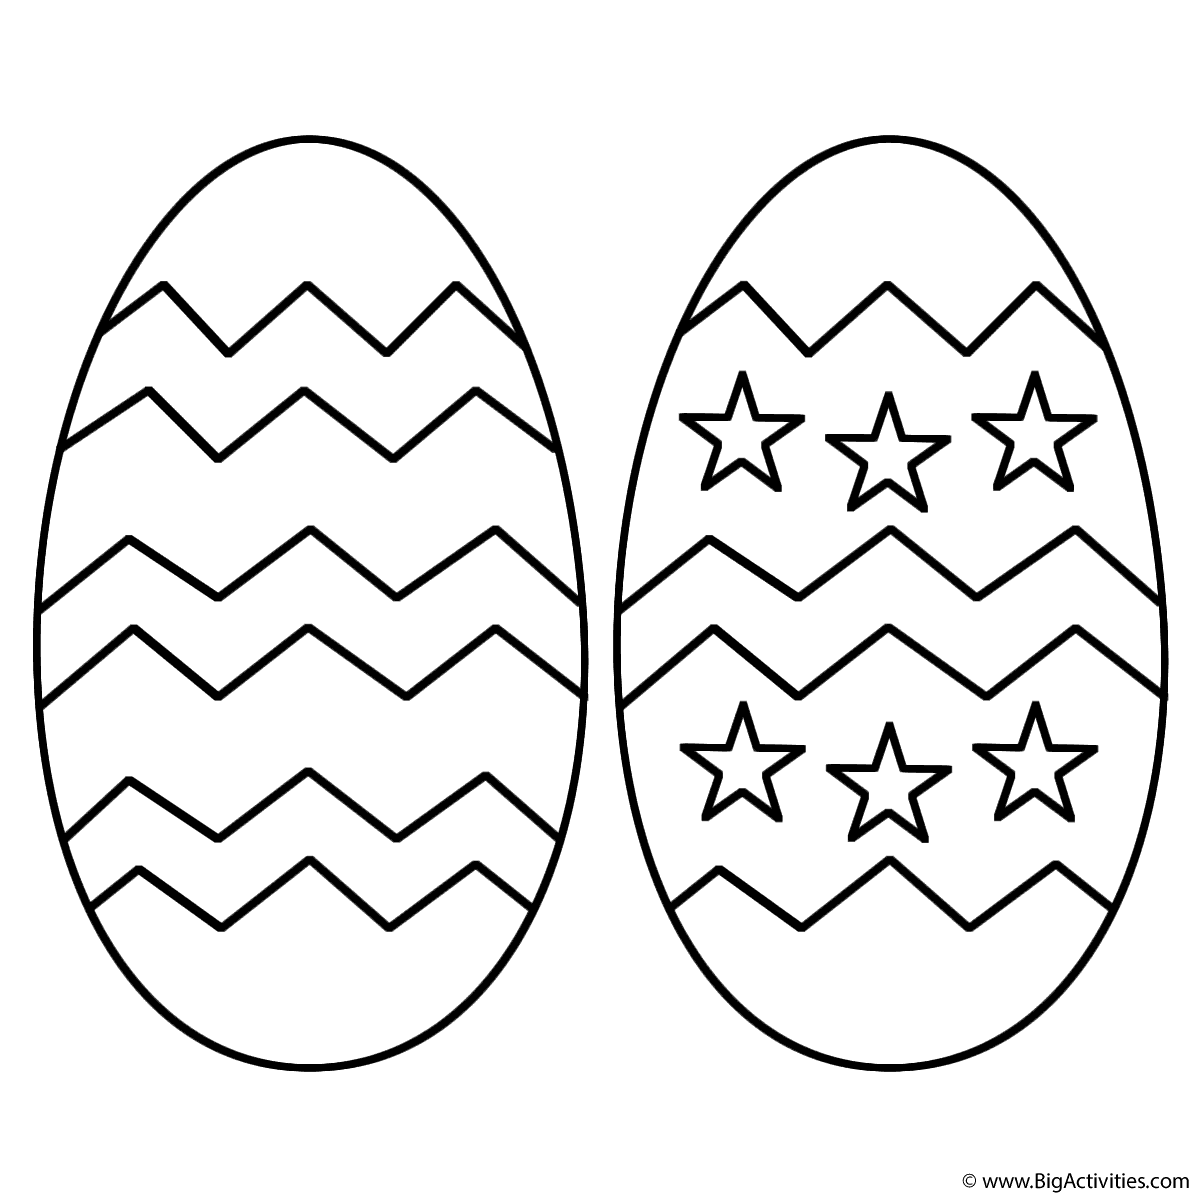 two-easter-eggs-with-patterns-coloring-page-easter